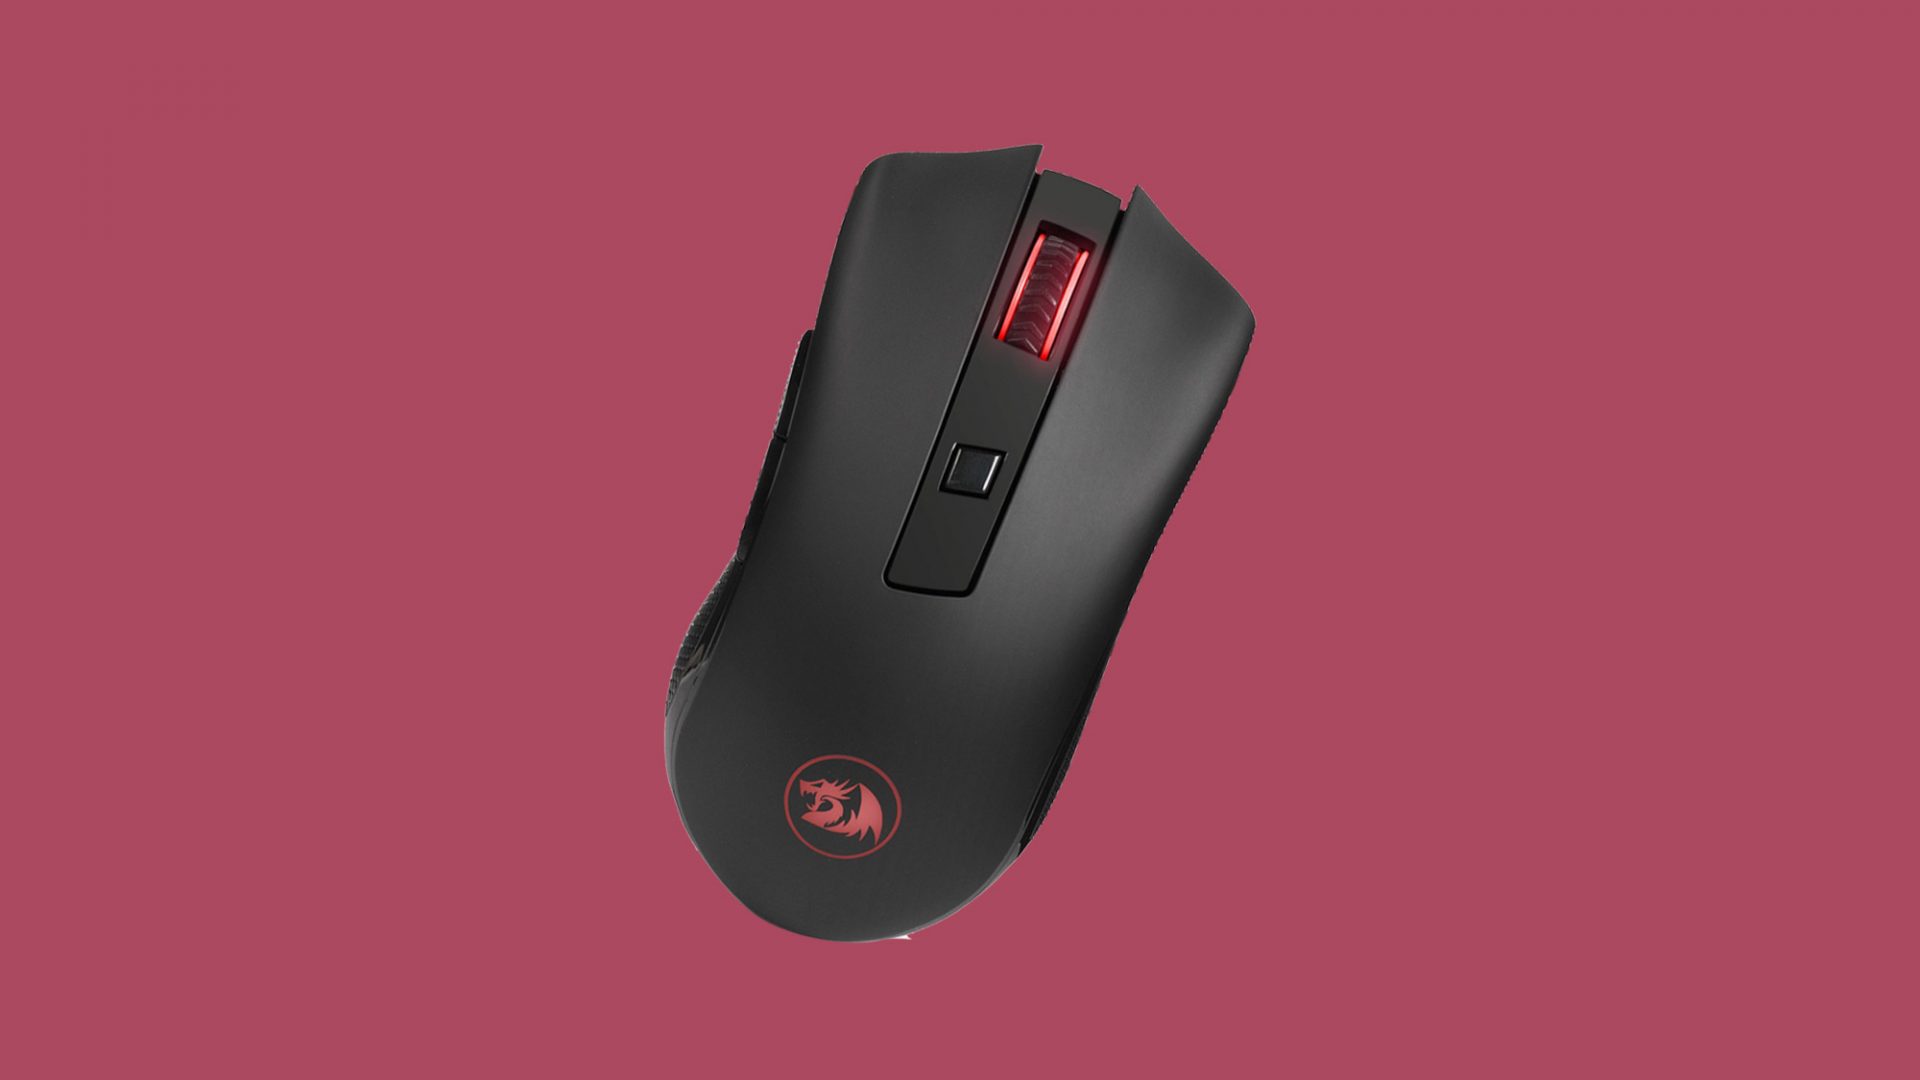 Essentially the simplest cheap gaming mouse deals in September 2020